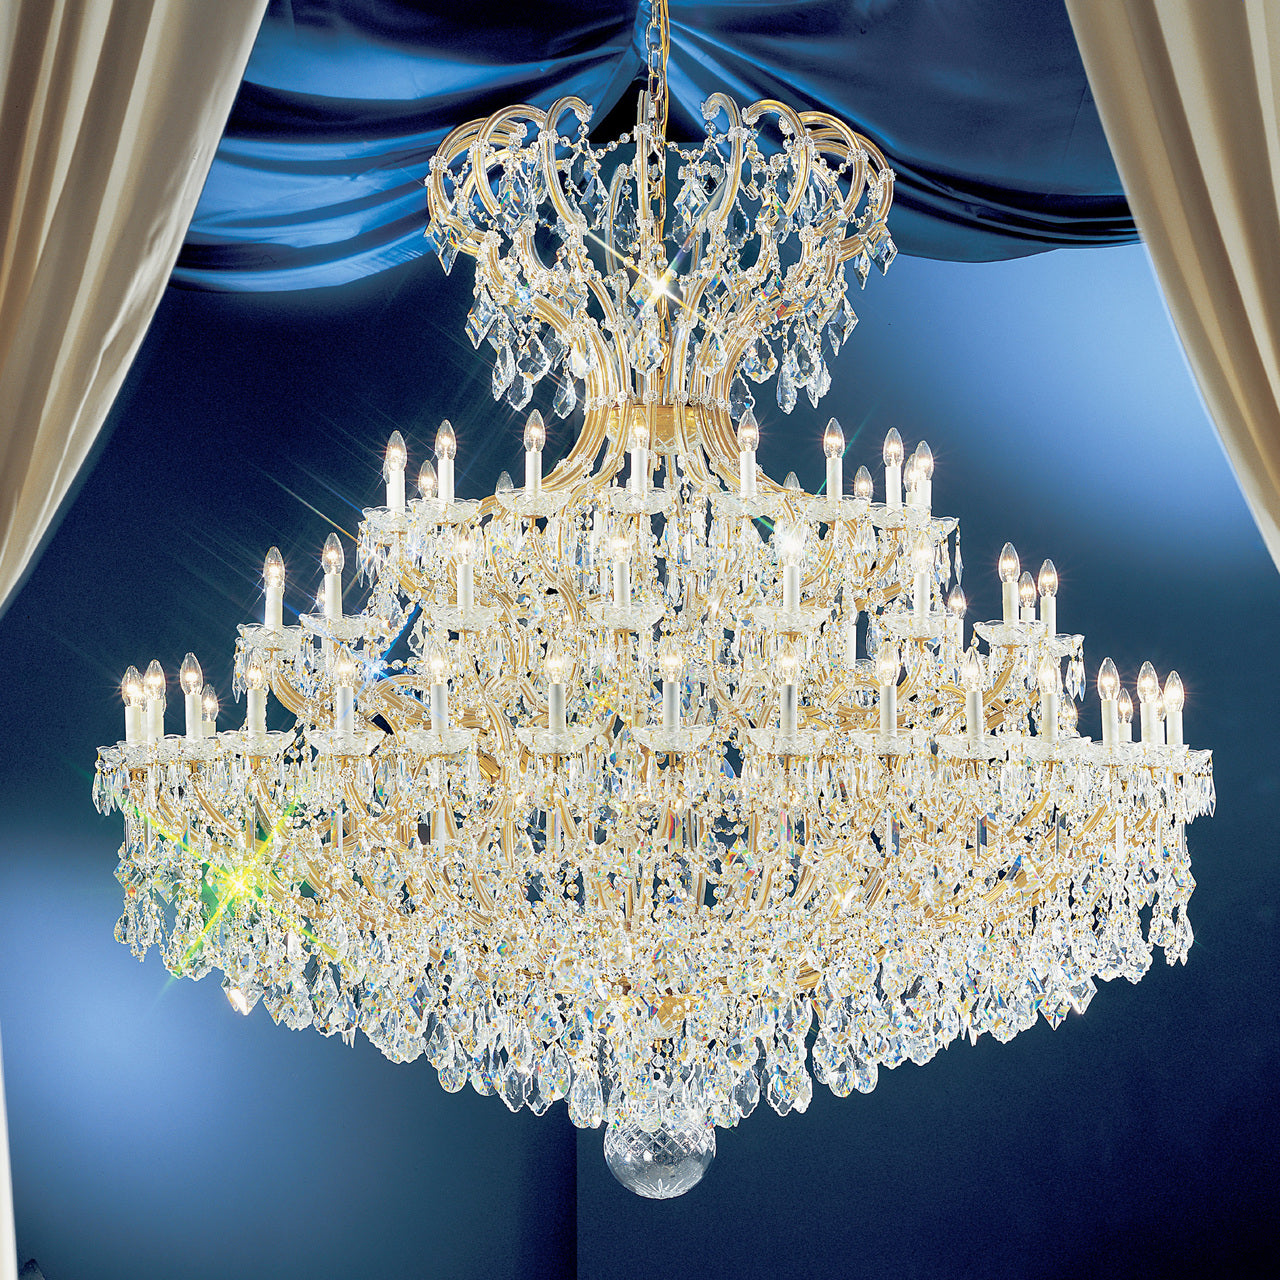 Classic Lighting 8169 OWG C Maria Theresa Traditional Crystal Chandelier in Olde World Gold (Imported from Italy)